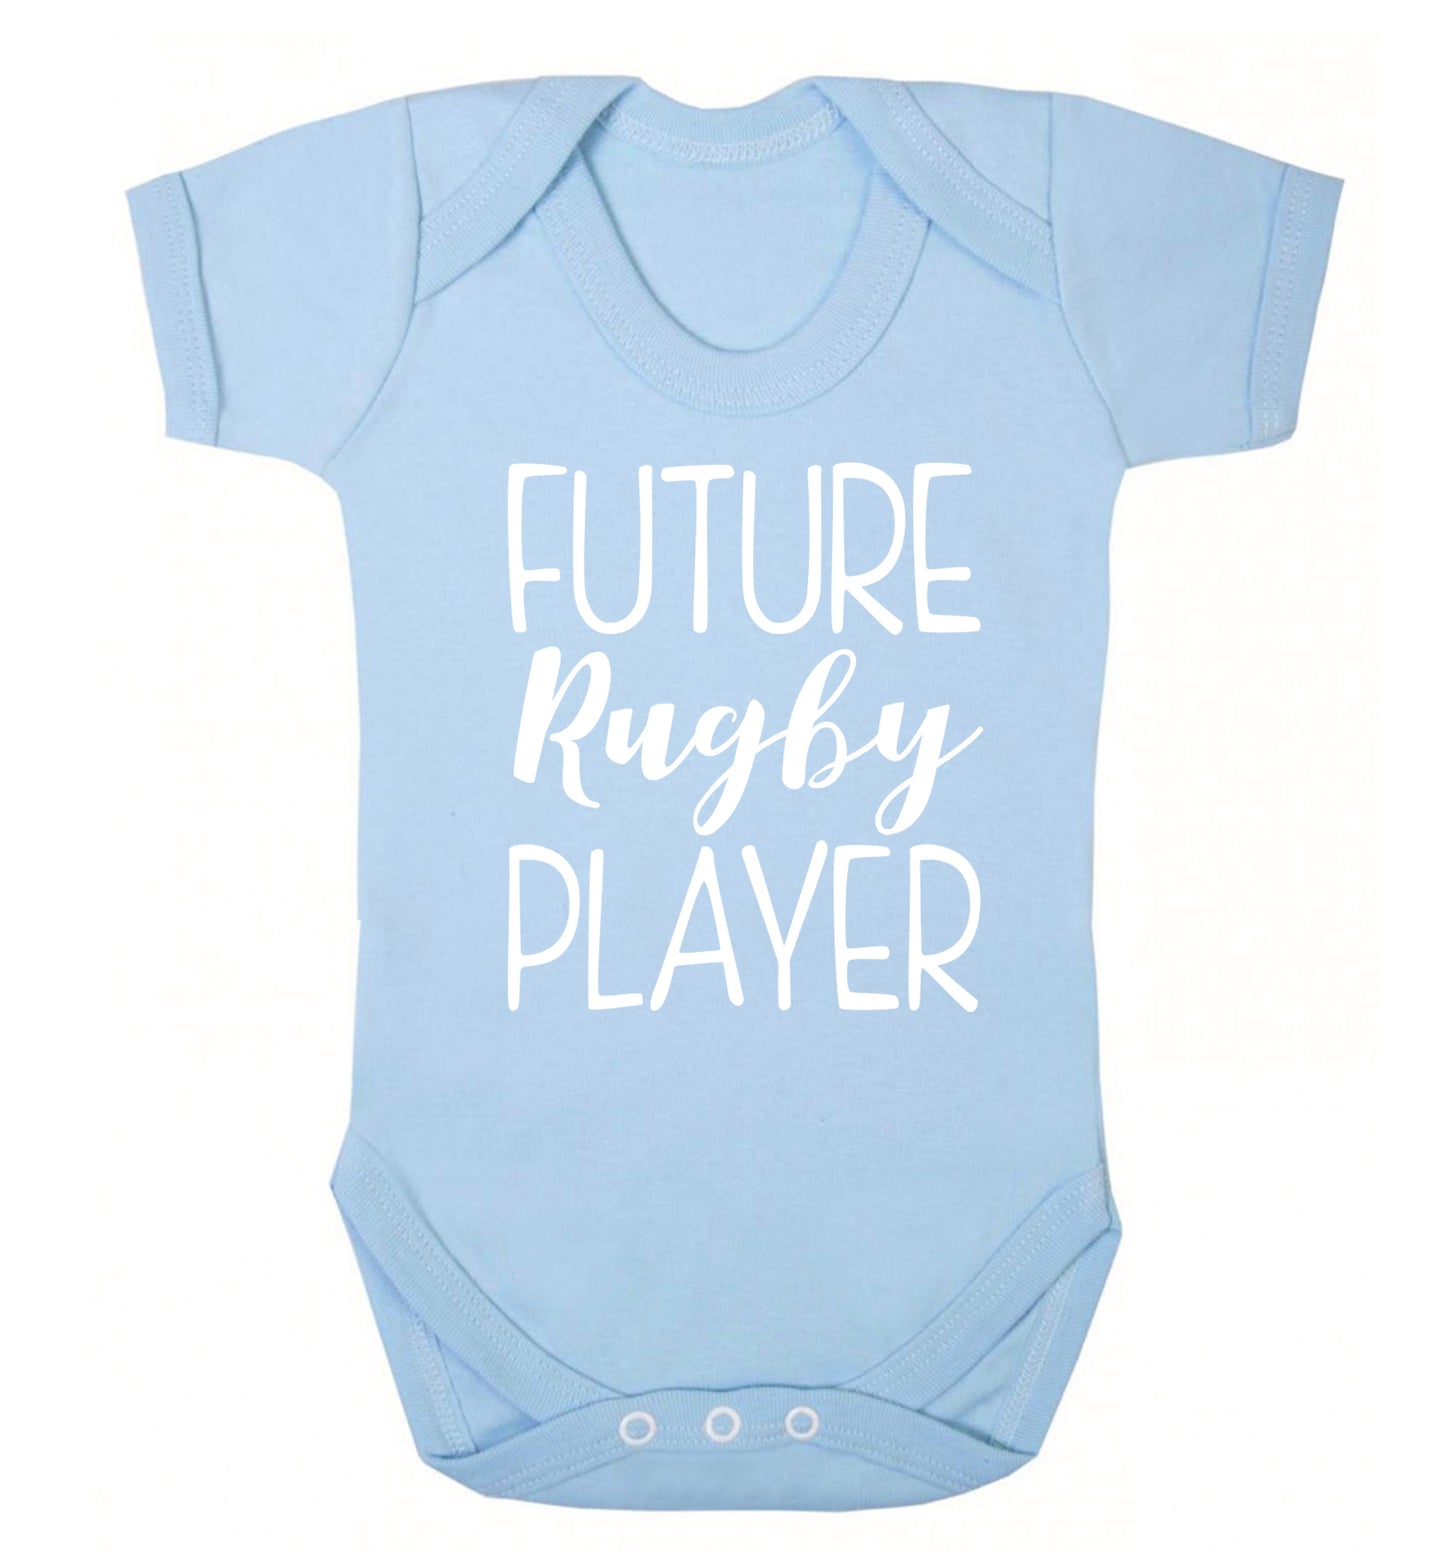 Future rugby player Baby Vest pale blue 18-24 months